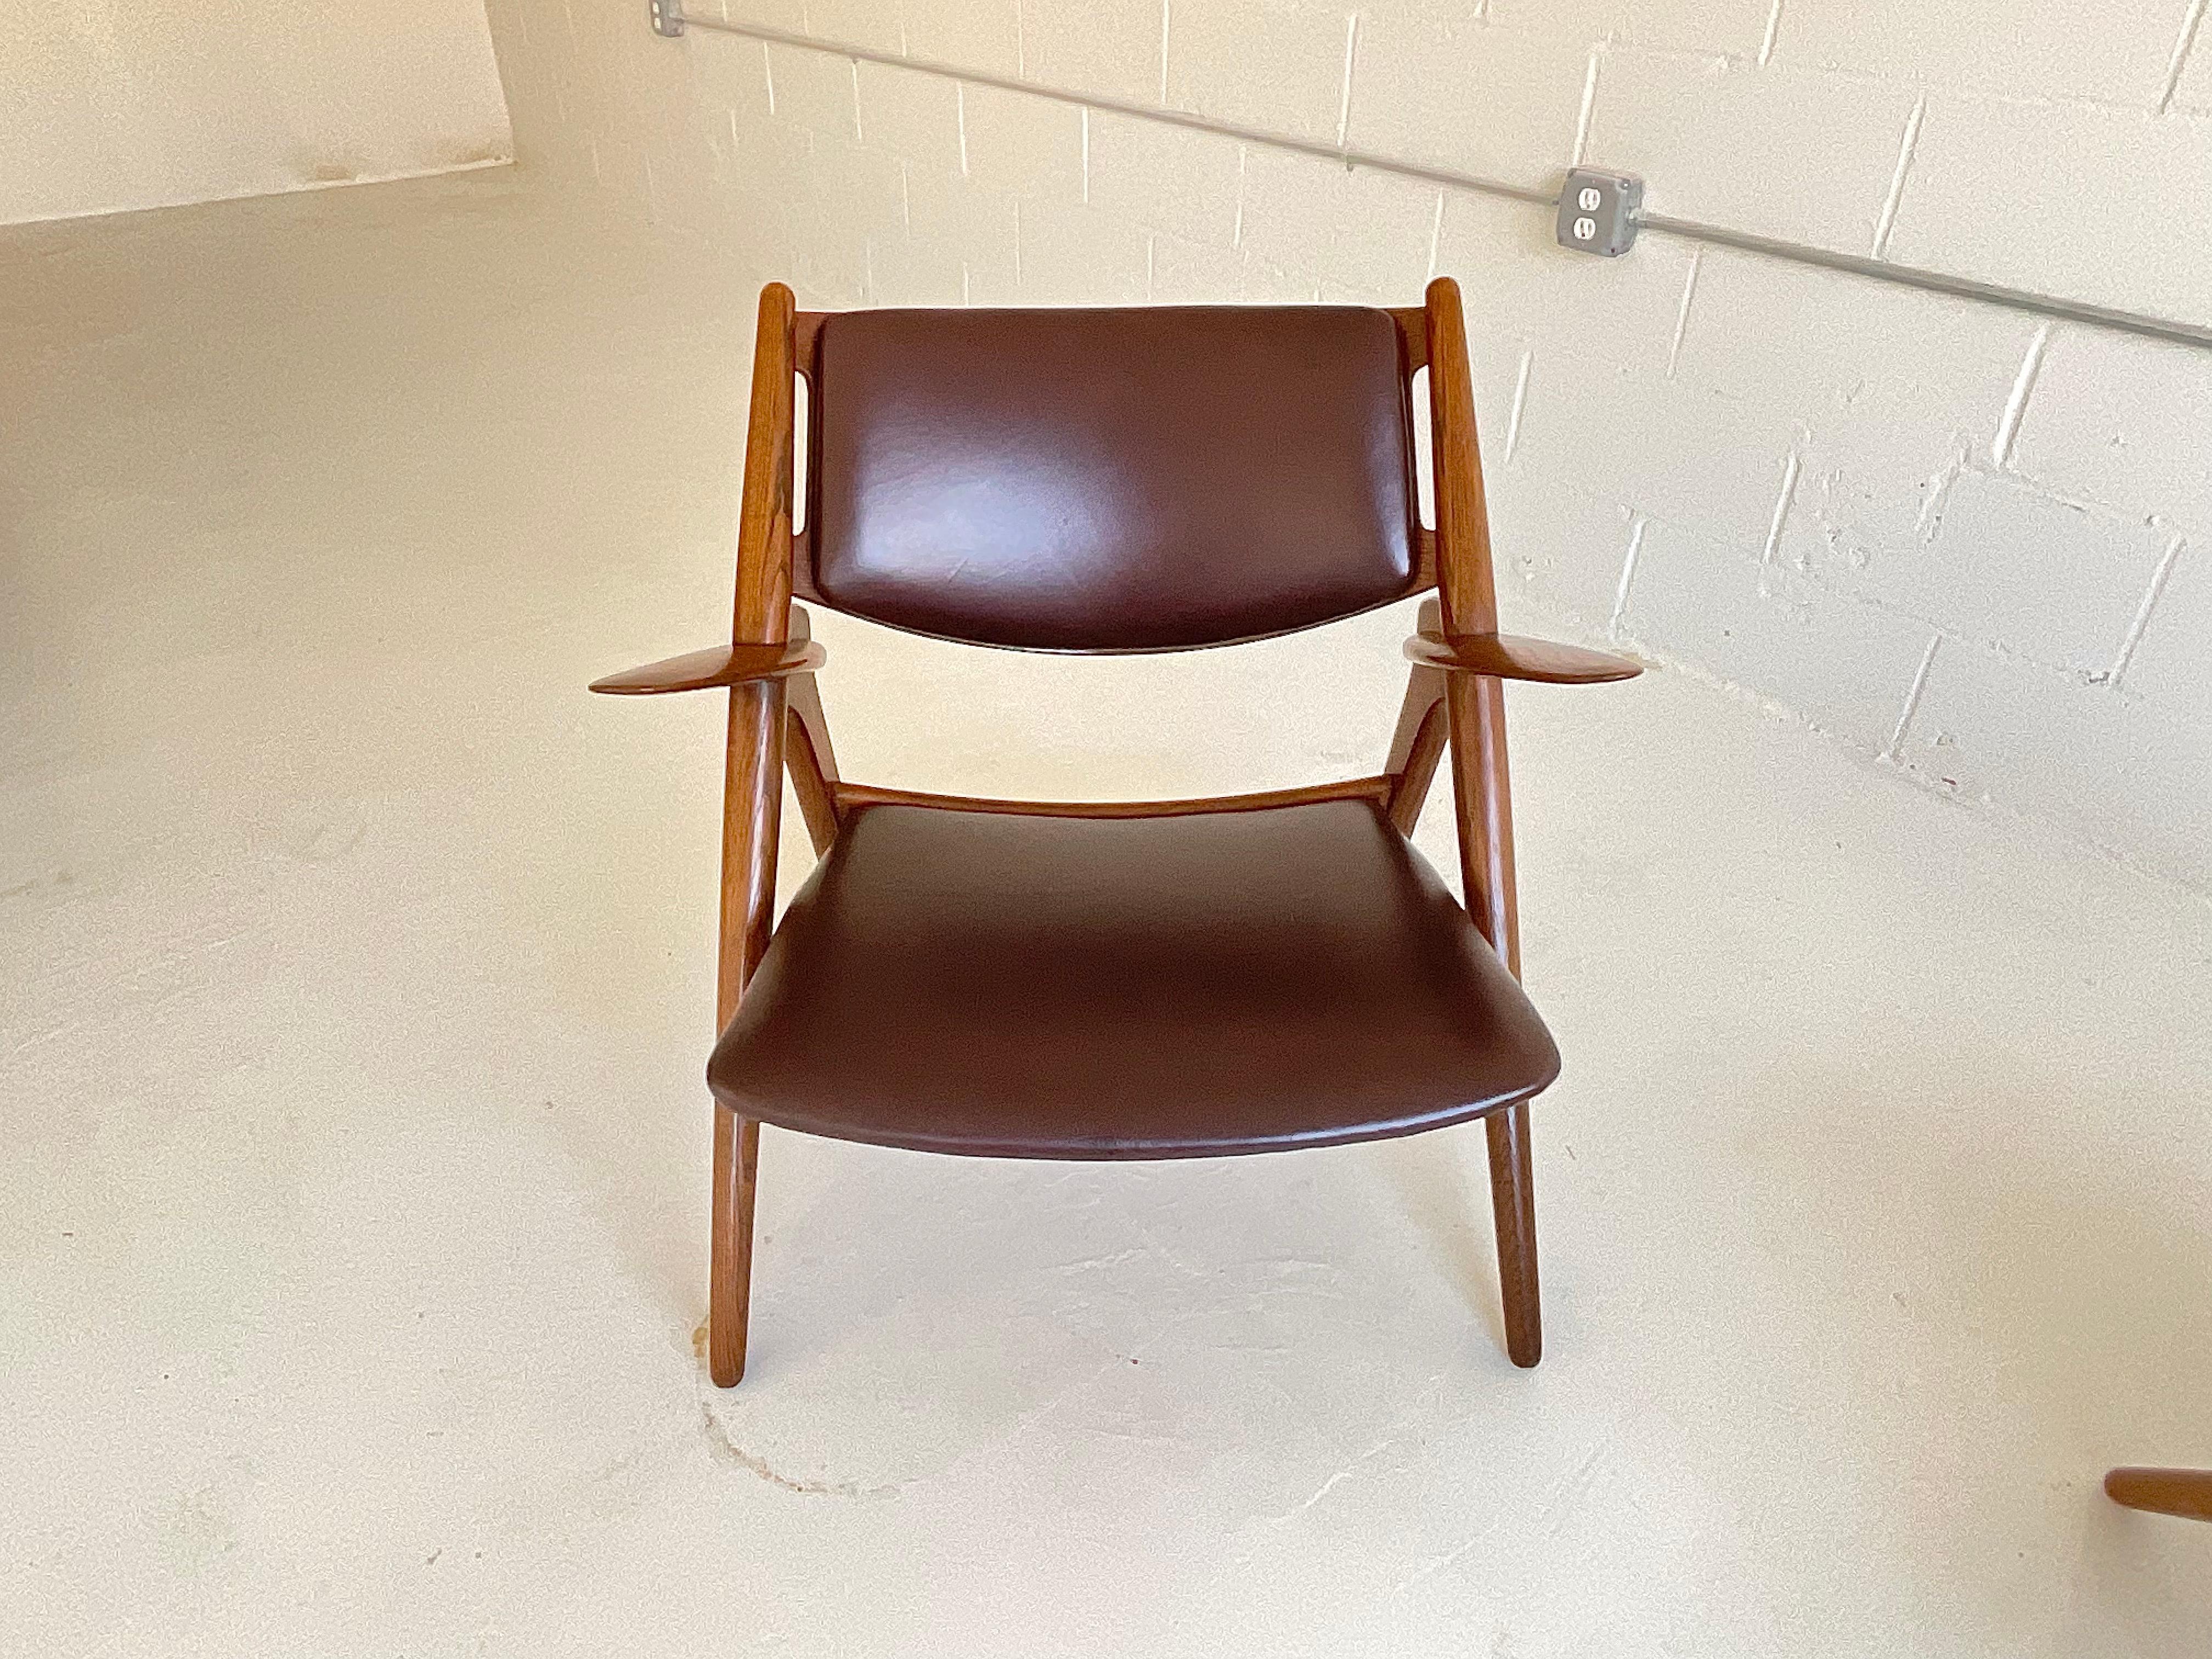 Hans Wegner Vintage Sawbuck Chairs for Carl Hansen CH28 in Oak & Leather, 1951 For Sale 14